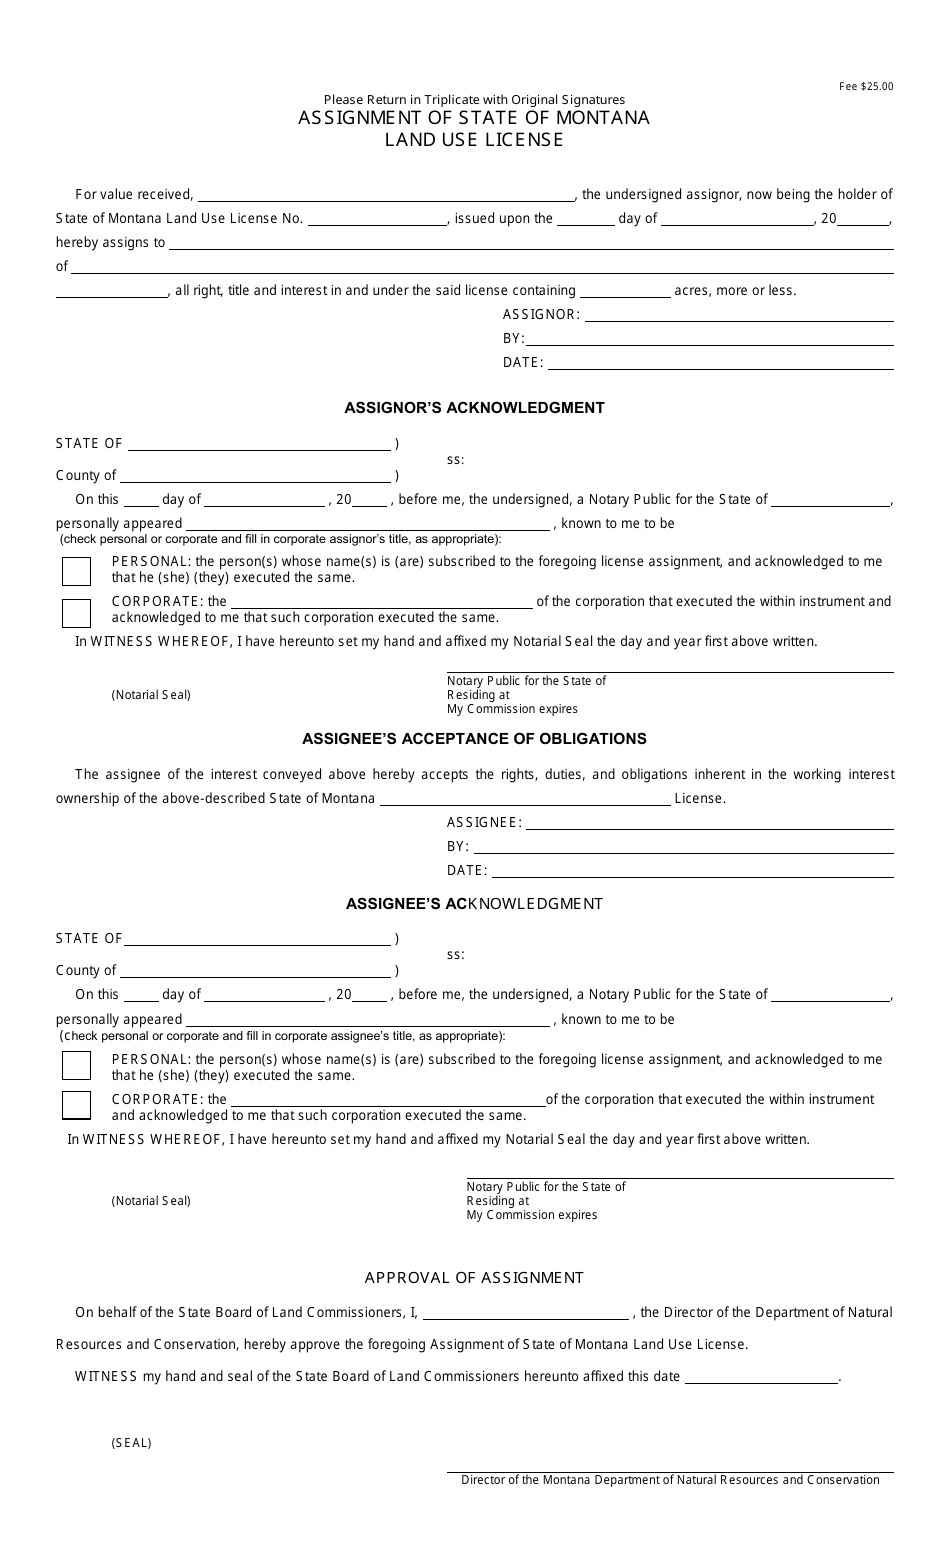 Assignment of State of Montana Land Use License - Montana, Page 1